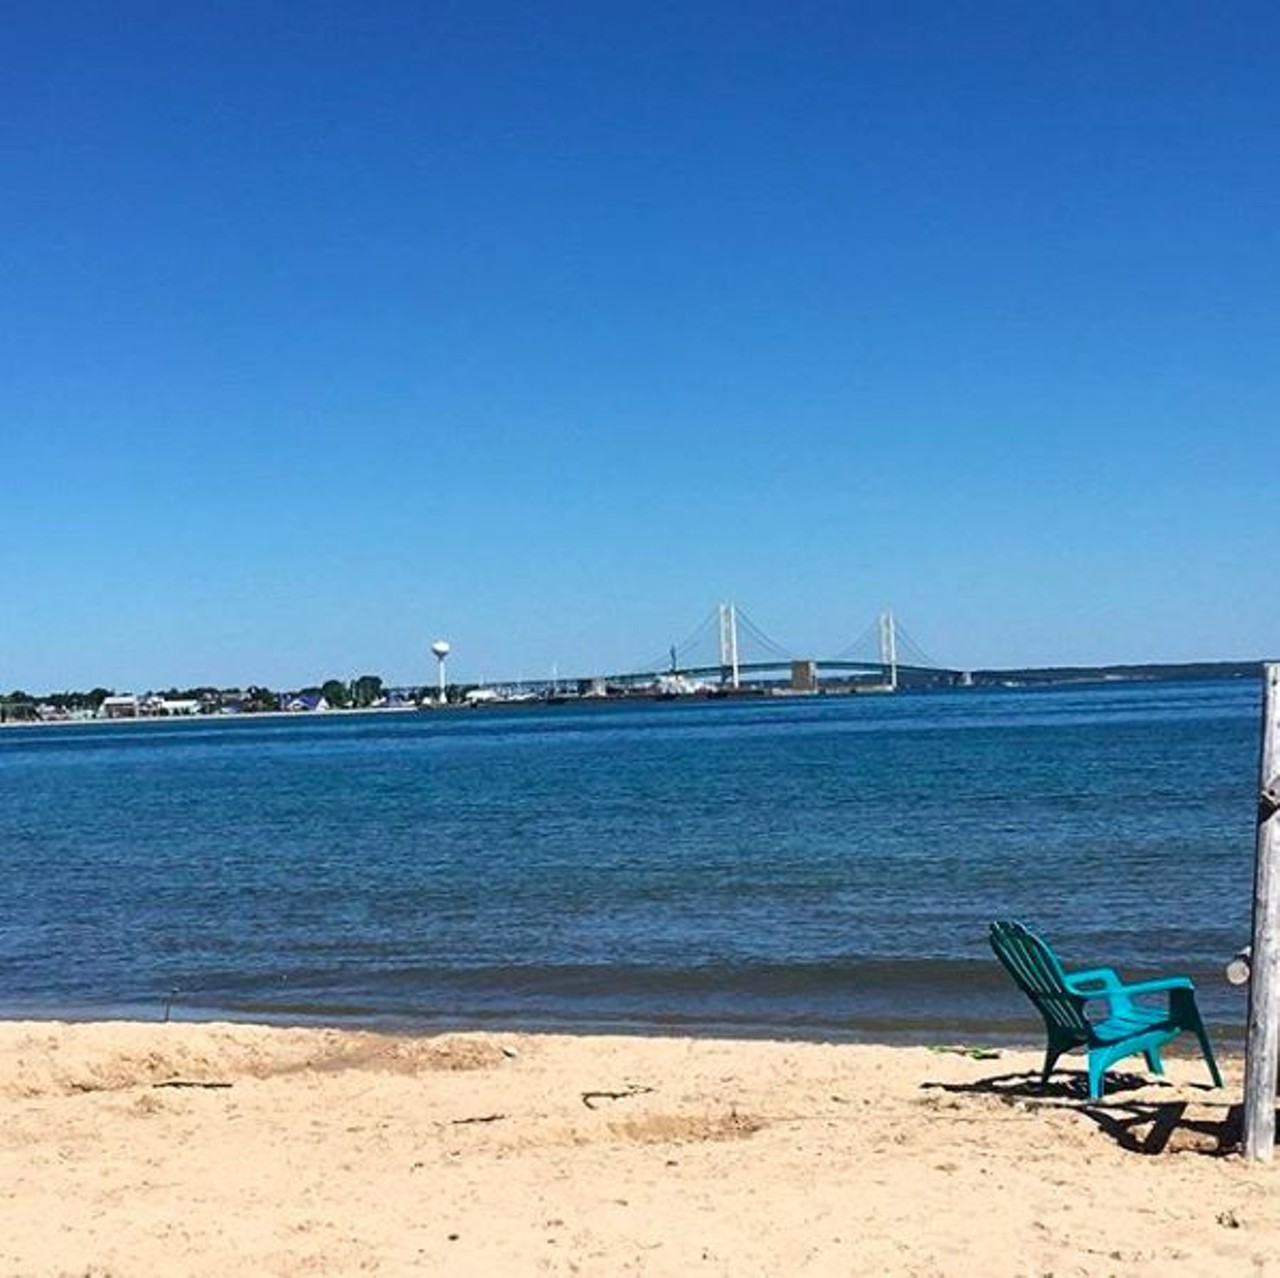 Tee Pee Campground
Mackinaw City, MI
This privately owned campground overlooks the Mackinaw Bridge, Straits of Mackinaw and much more. Not to mention, you are only a boat ride away from Mackinaw Island and minutes away from Mackinaw City. This campground is central to many attractions, but still offers beachfront views of one of the treasures of Michigan. 
Photo via IG user @dingbatjanet